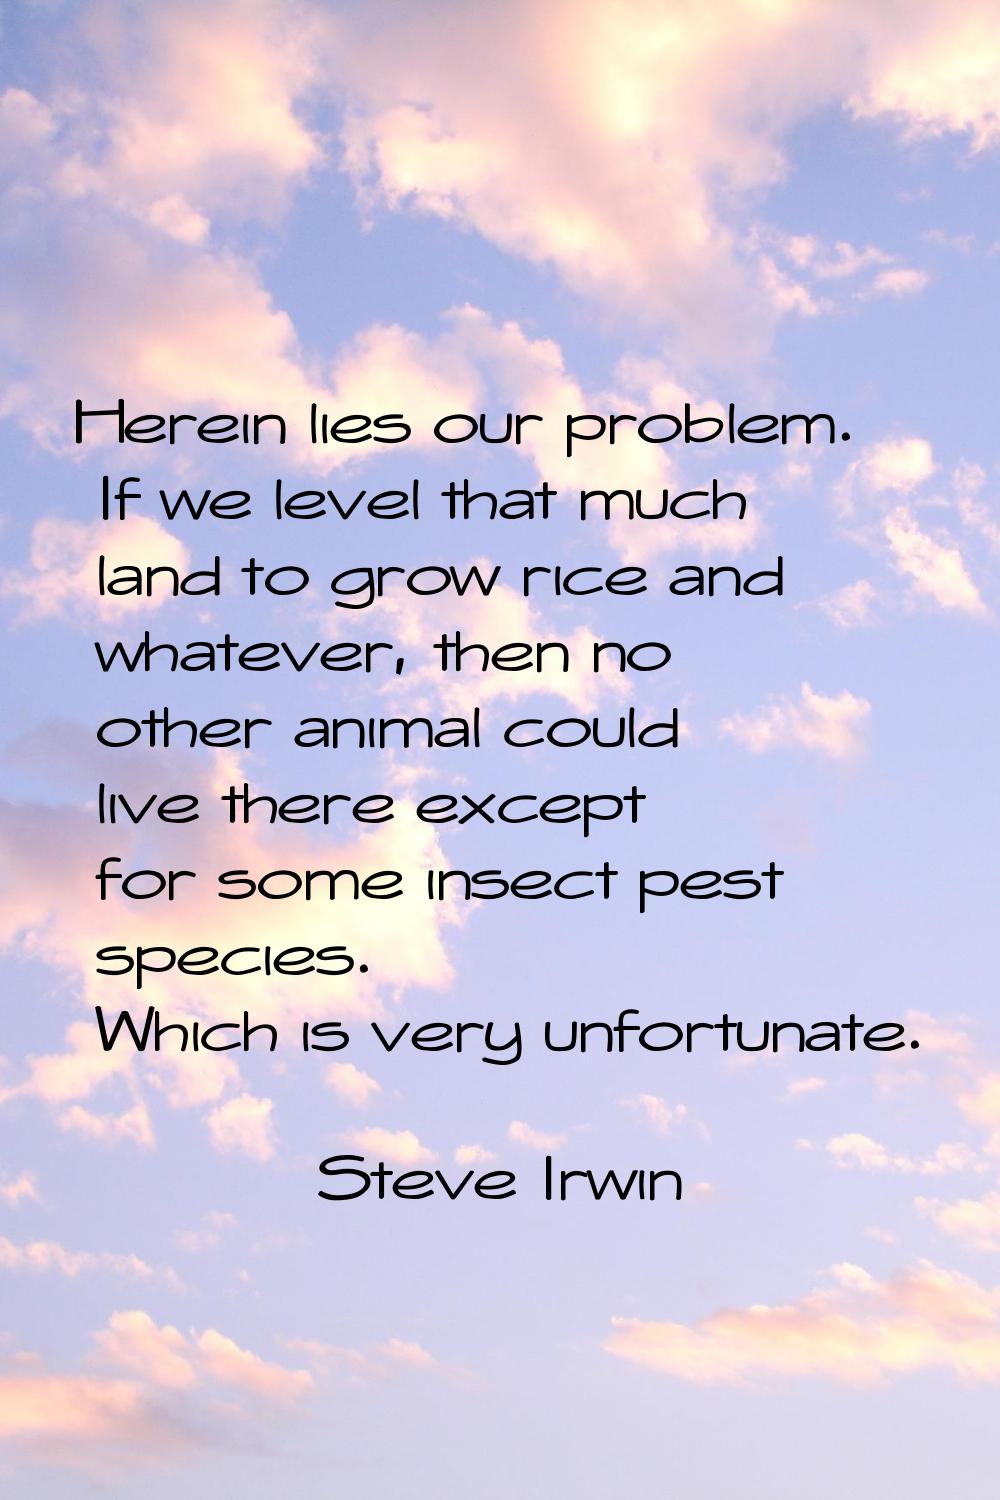 Herein lies our problem. If we level that much land to grow rice and whatever, then no other animal